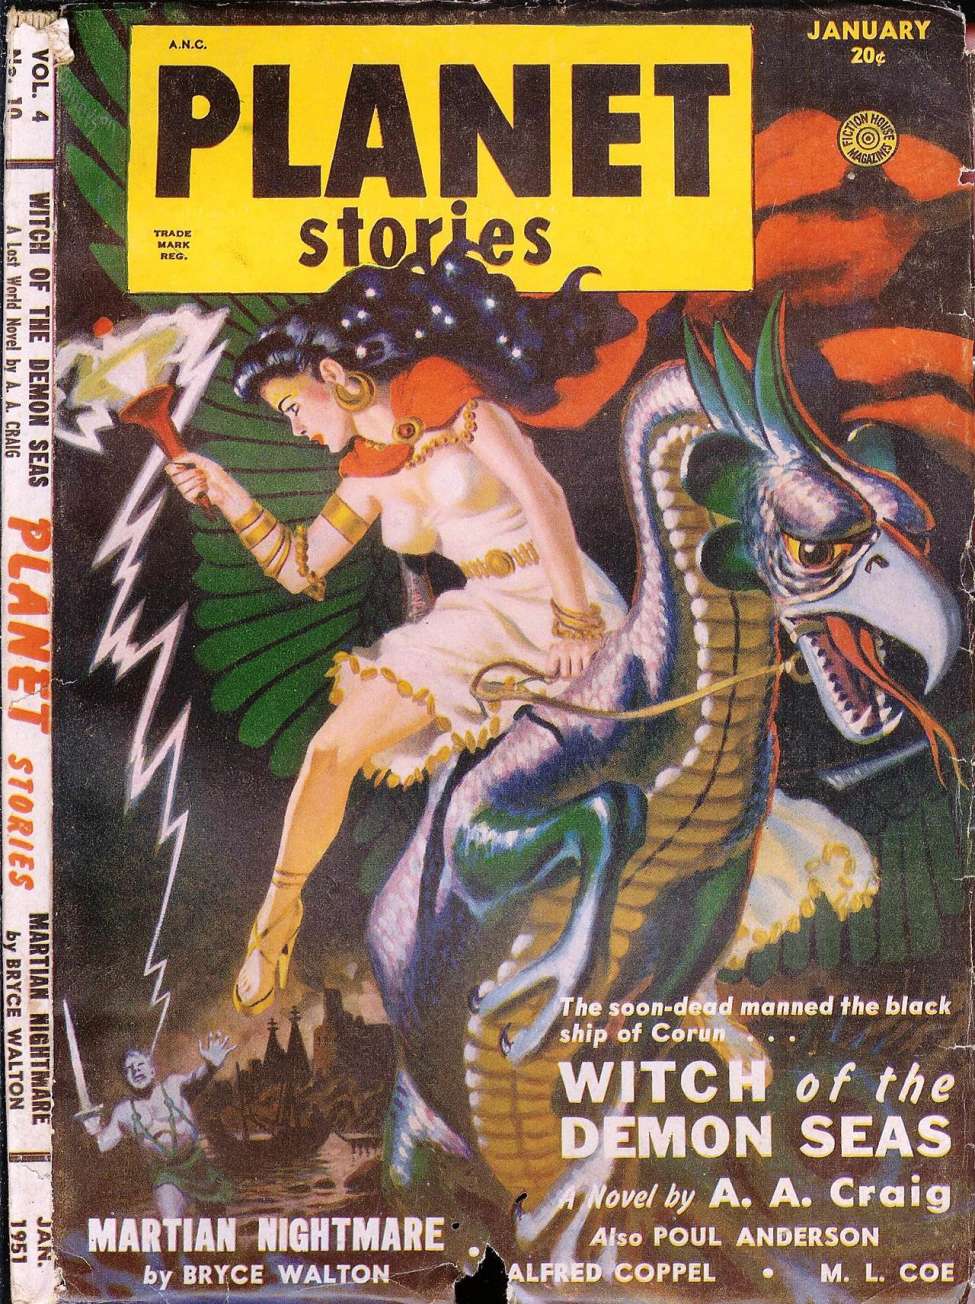 Comic Book Cover For Planet Stories v4 10 - Witch of the Demon Seas - A. A. Craig